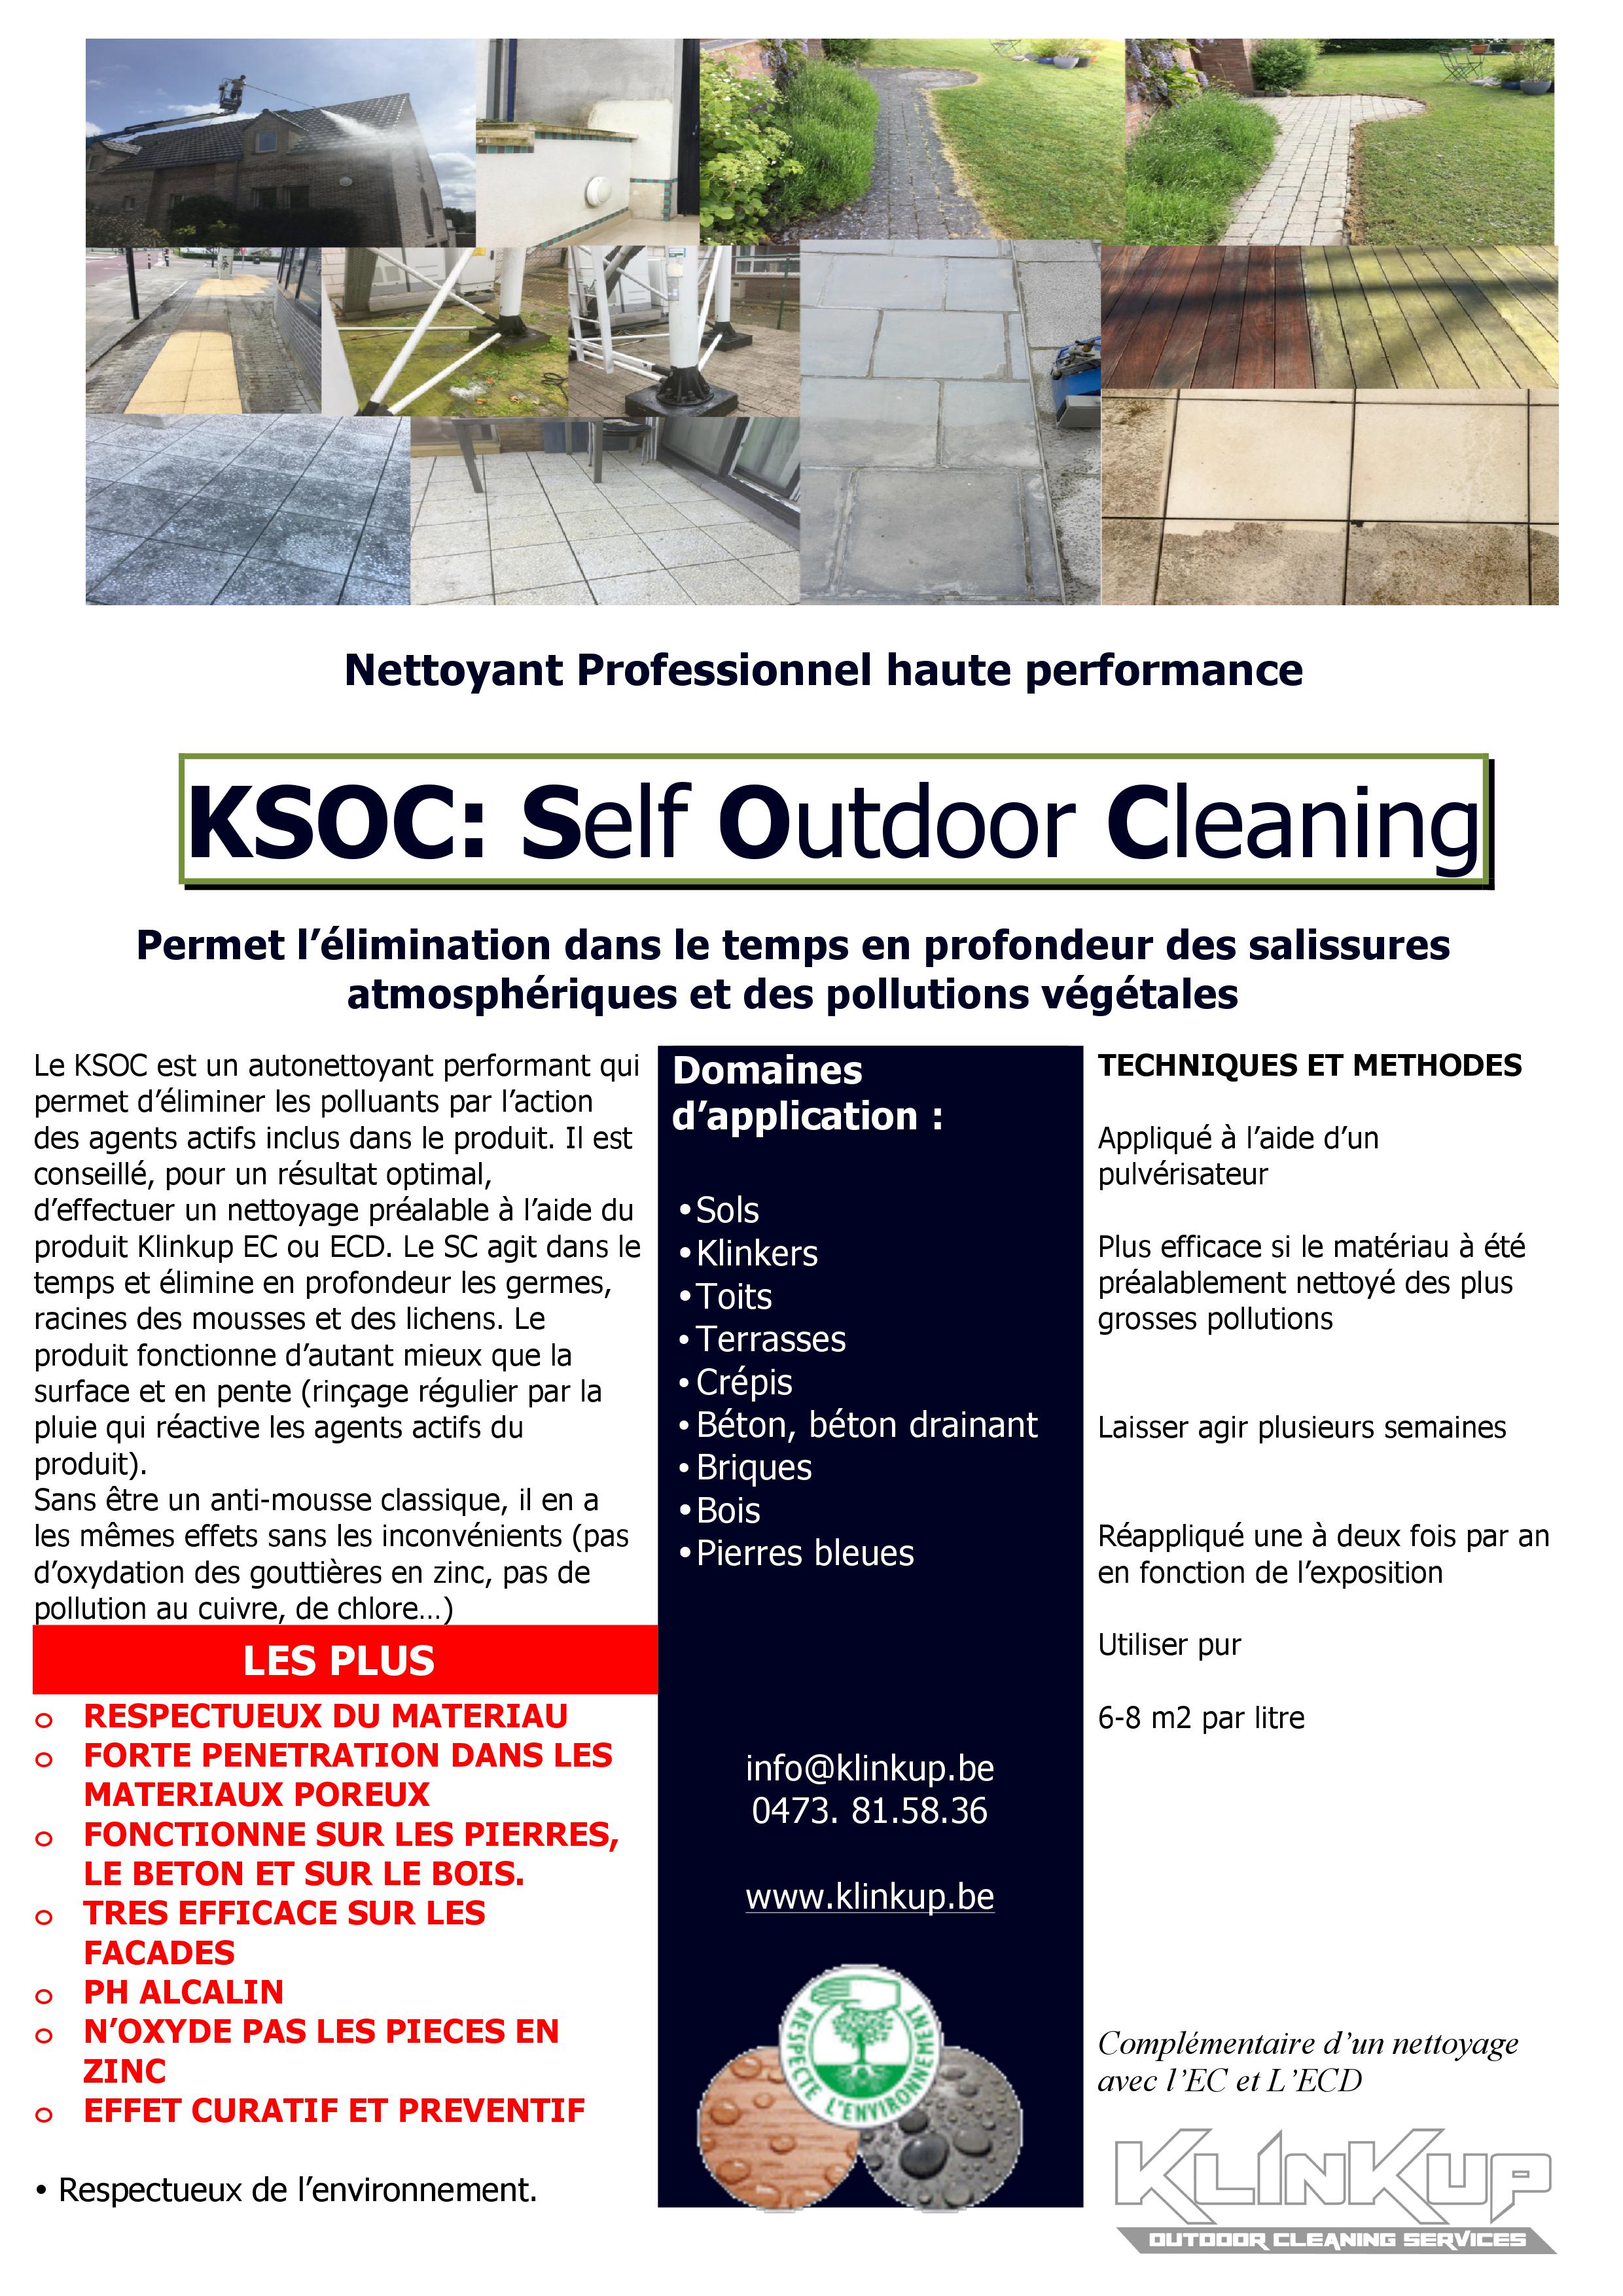 KSOC : Self outdoor Cleaning